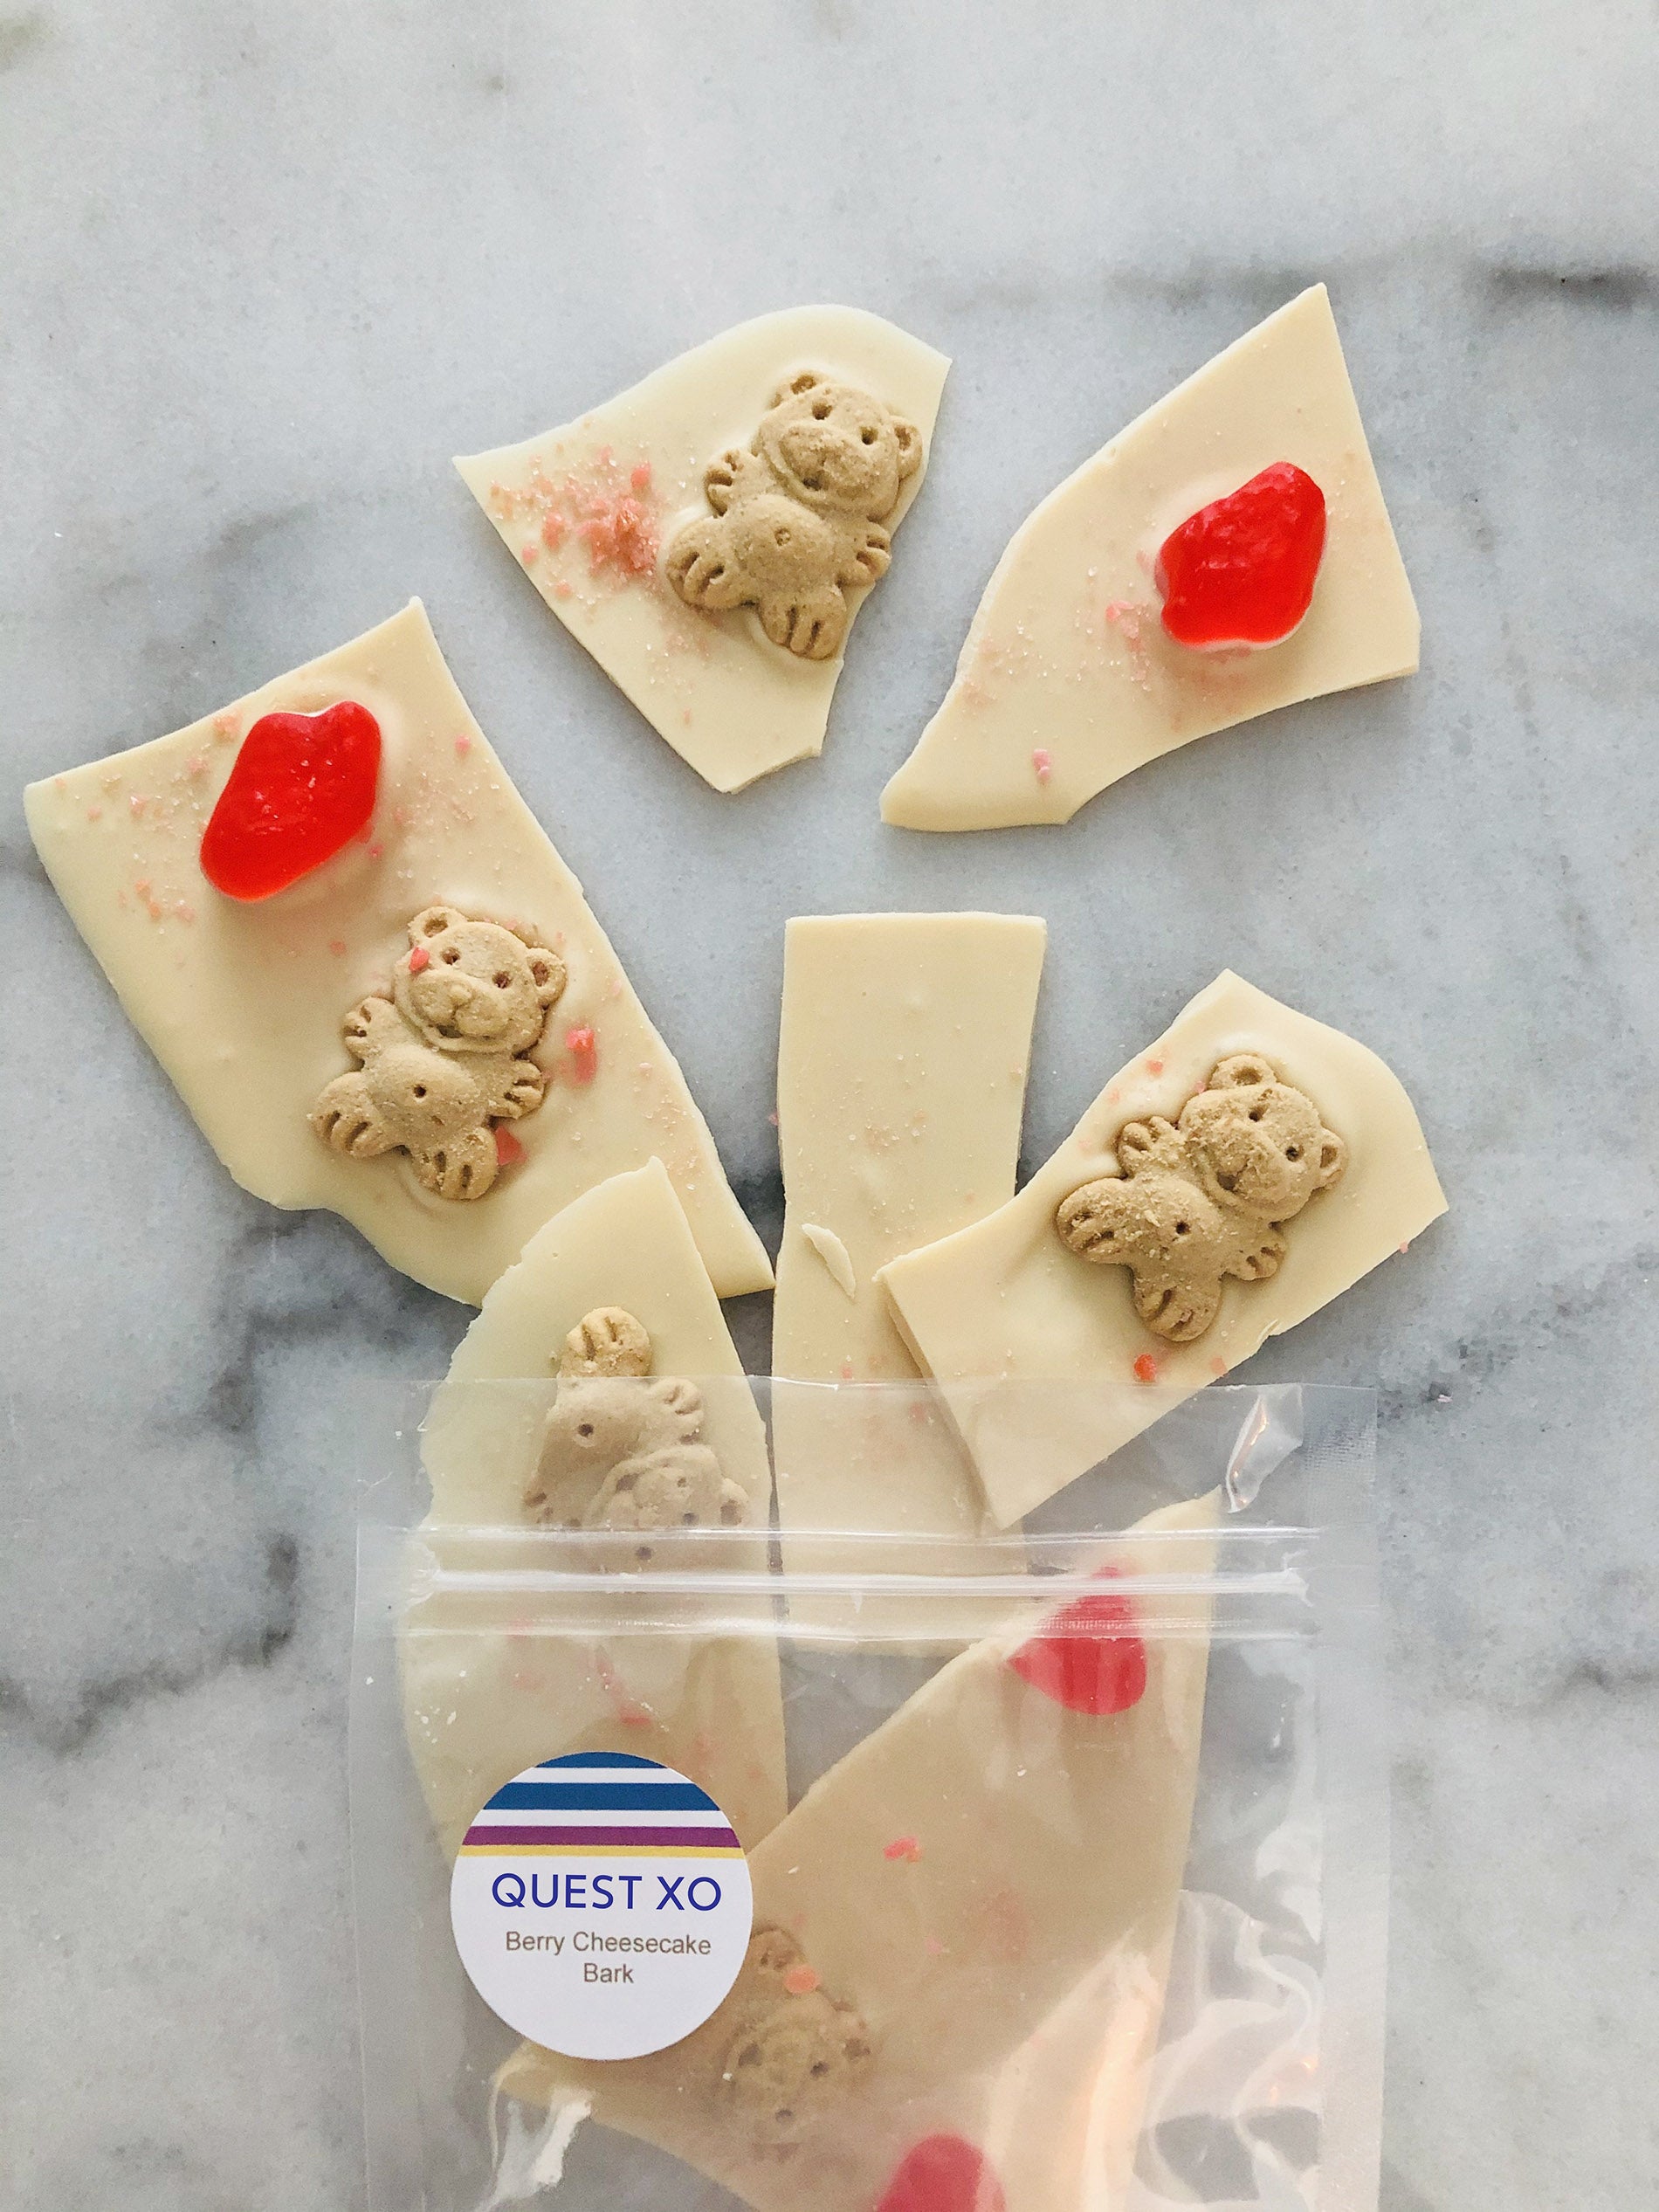 QUEST XO Berry Cheesecake Bark: Pieces of white chocolate with teddy bears on it falling out of a transparent pack on a marble background.